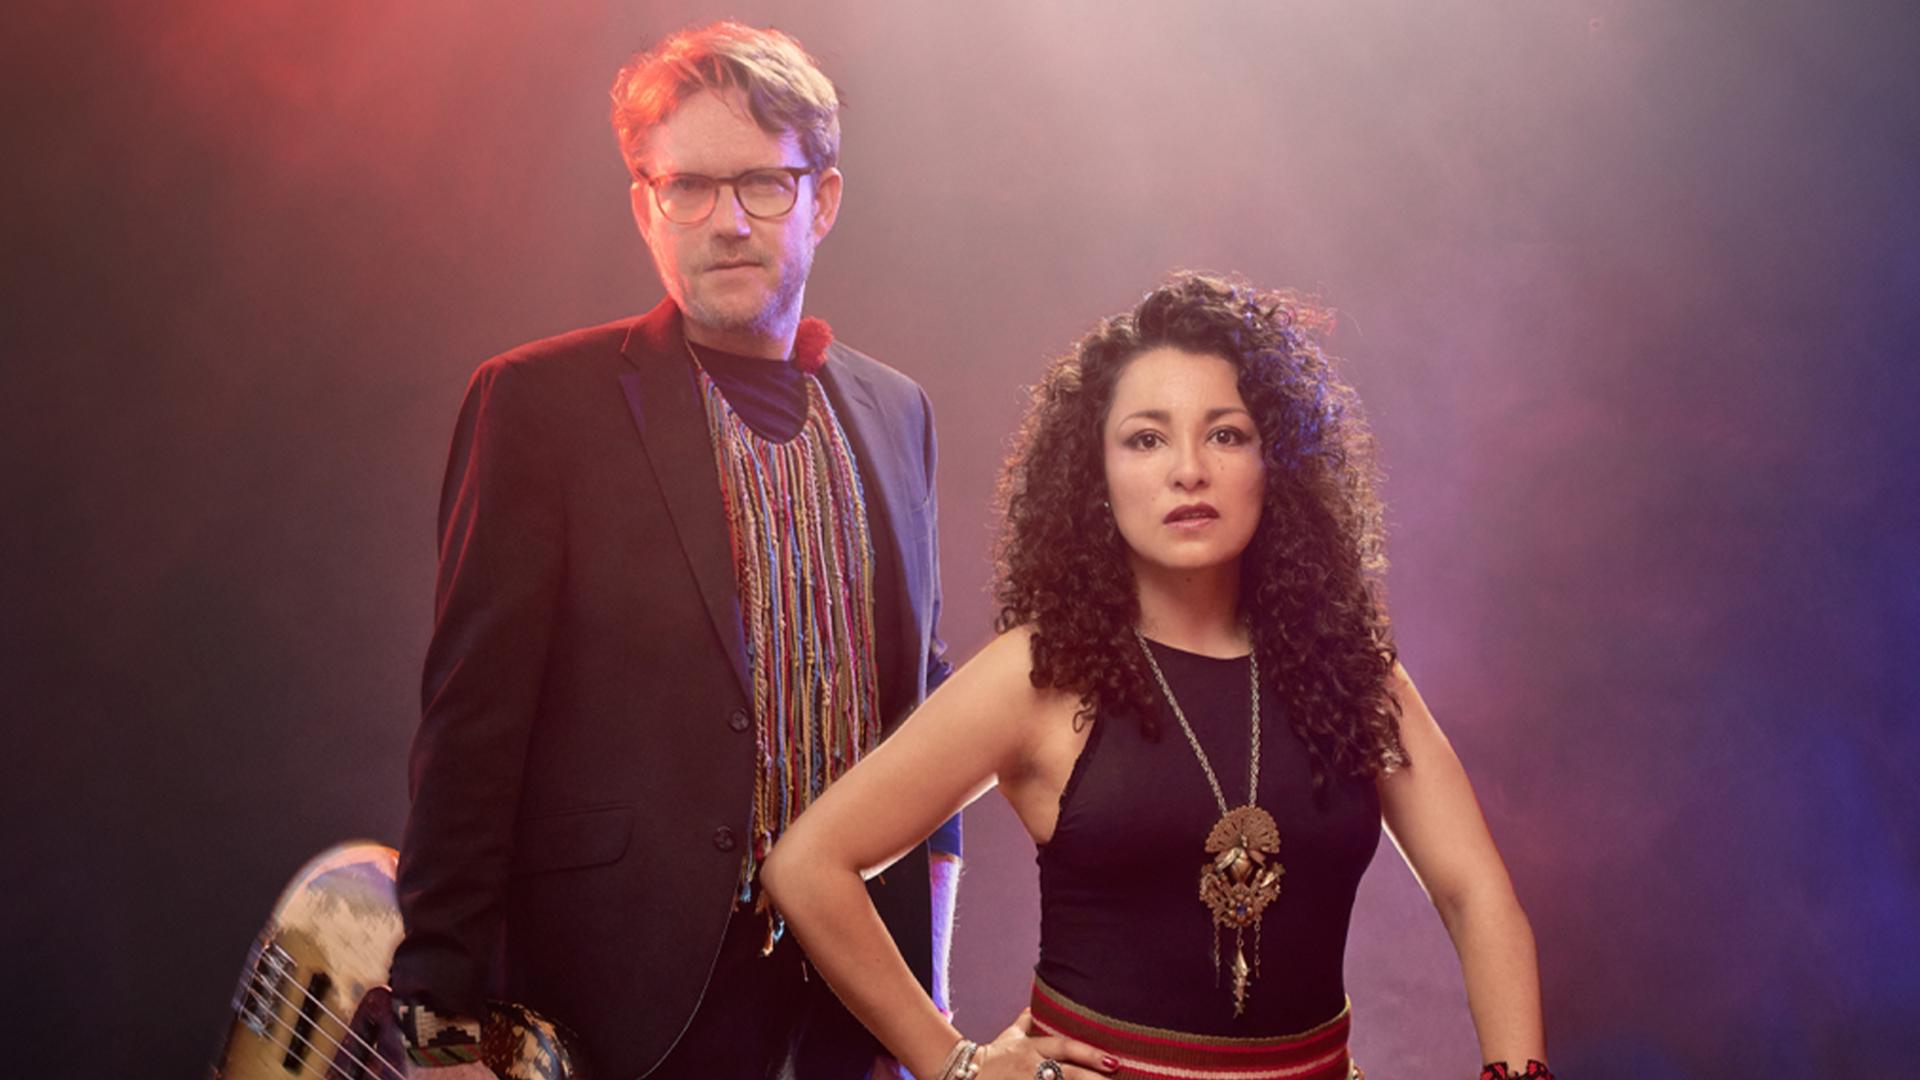 As a part of the Afro-Andean Funk duo, Araceli Poma, a Latin Grammy-nominated Peruvian singer and producer, together with bassist, composer and producer Matt Geraghty, often makes music about Indigenous language, culture and shamanism.